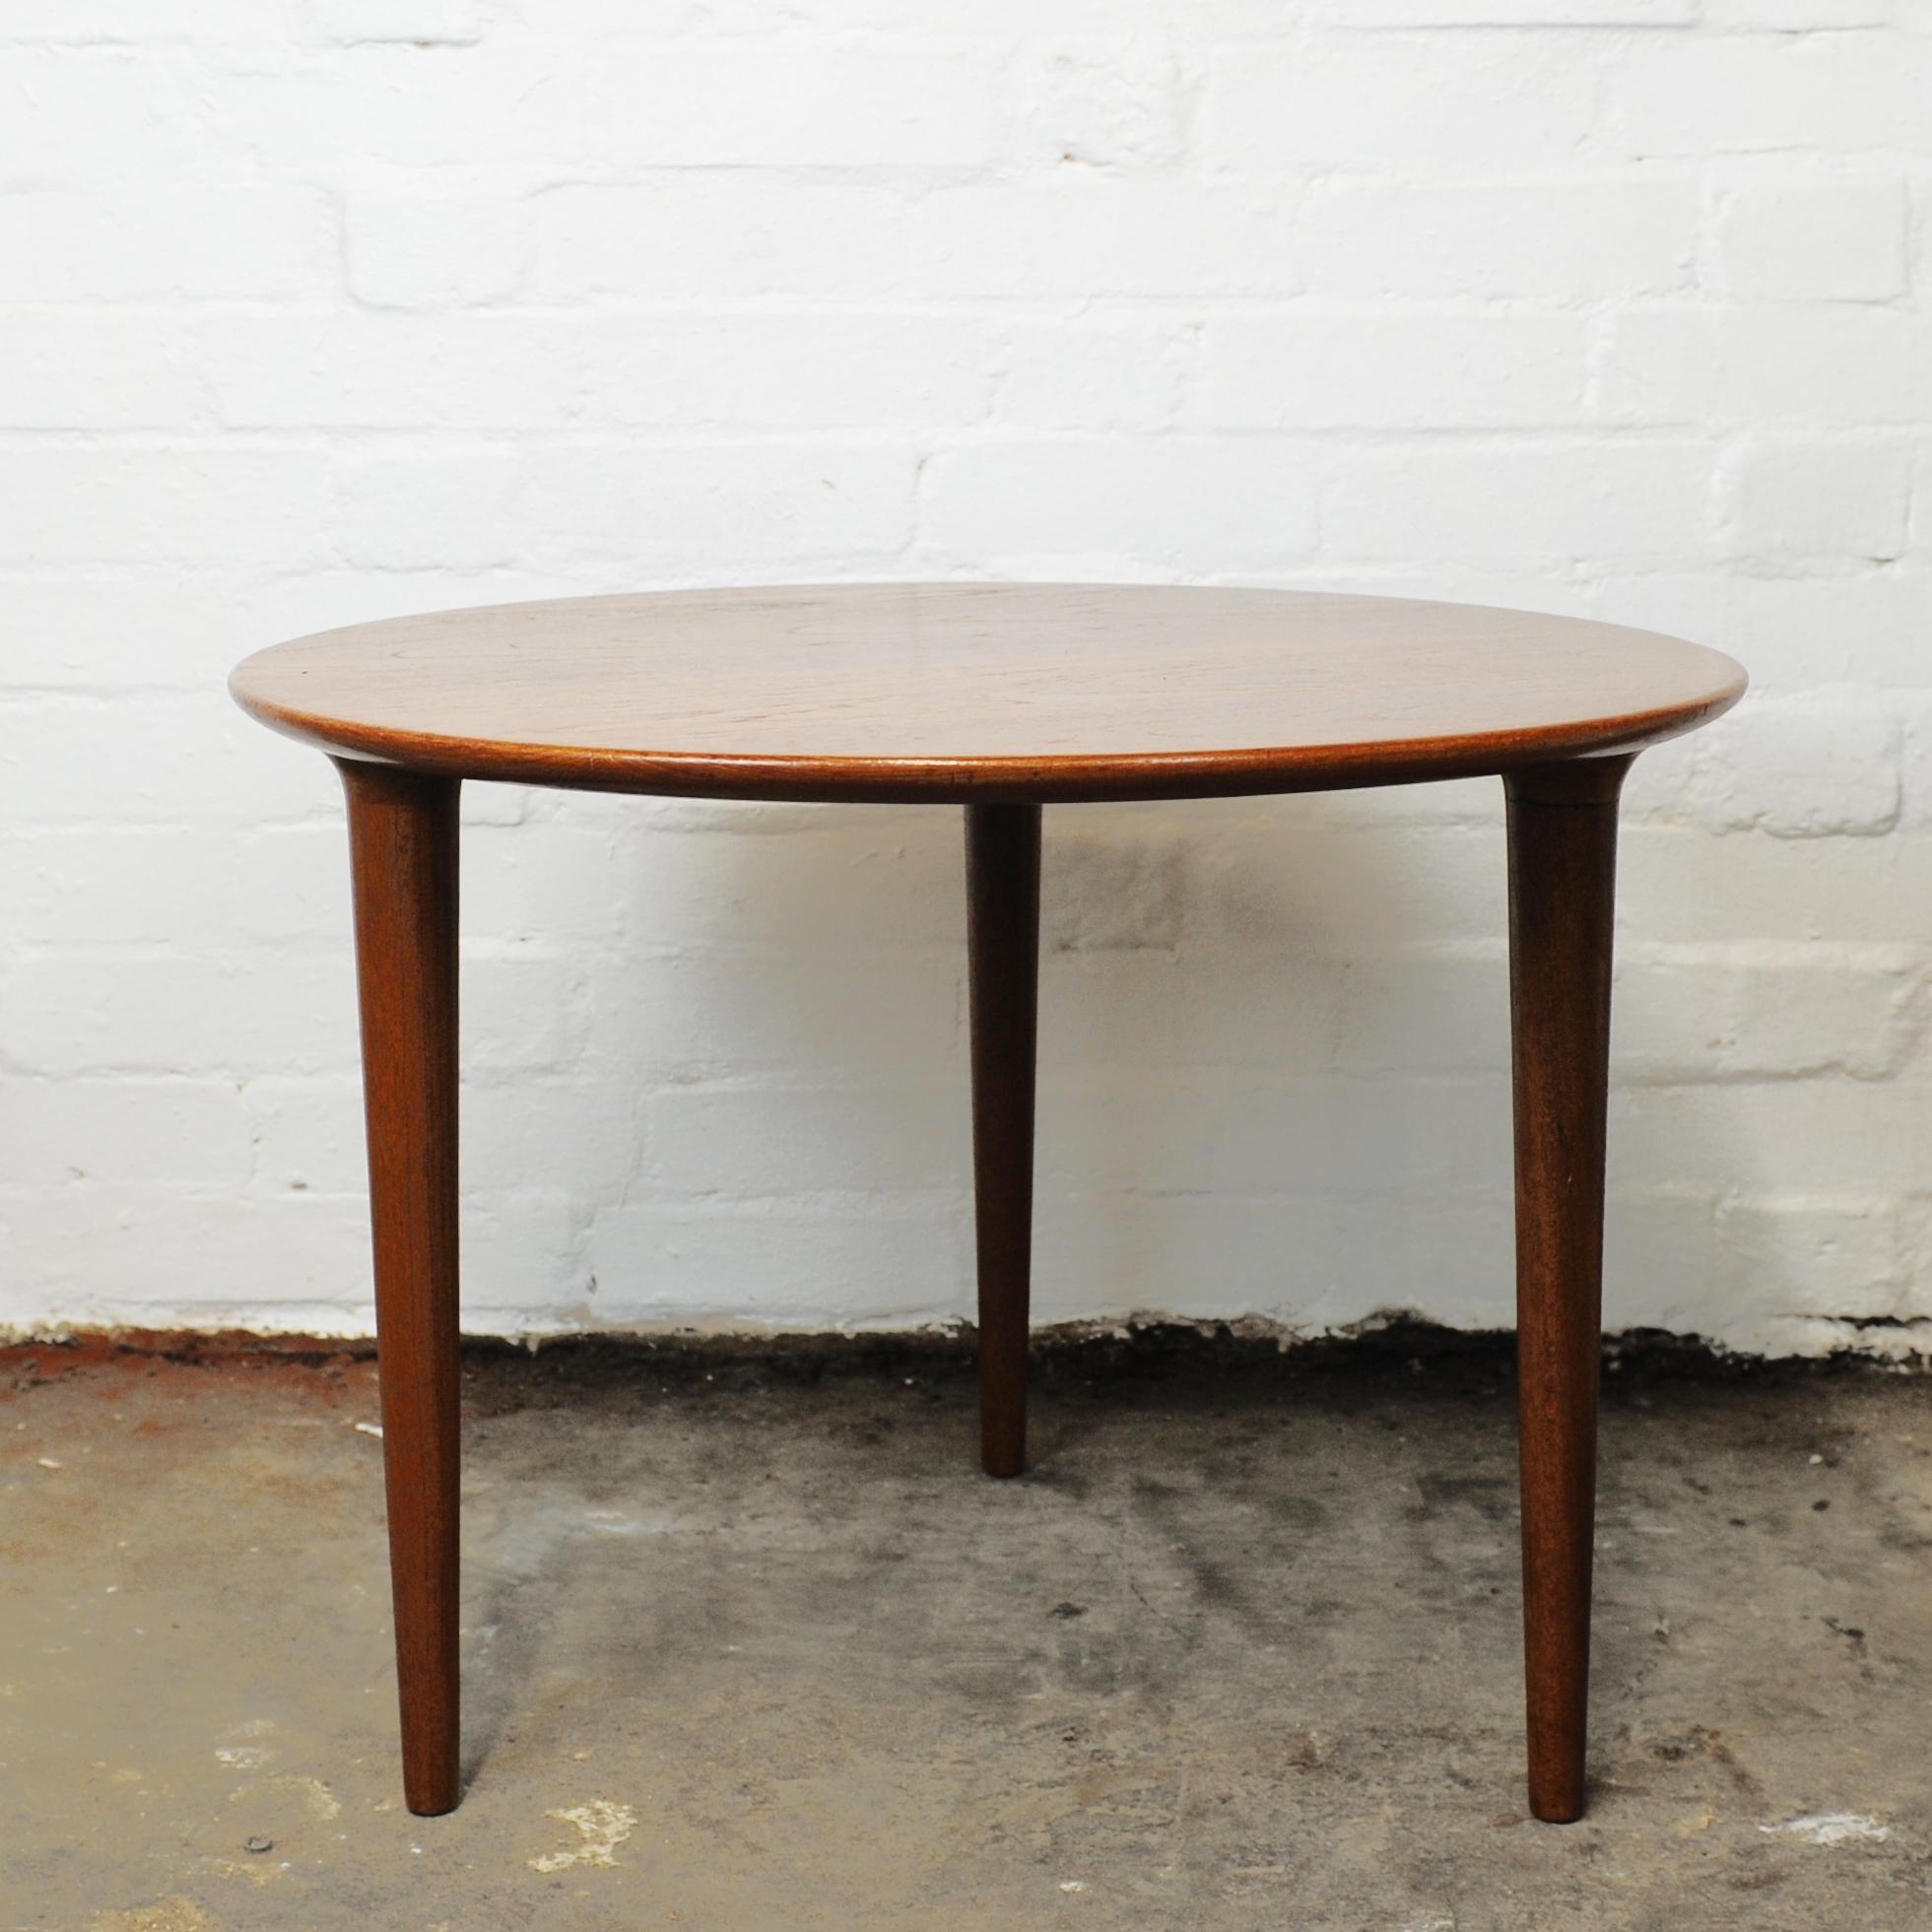 Round Teak Three Legged Coffee Table by Norsk Design Ltd, 1960s For Sale 2